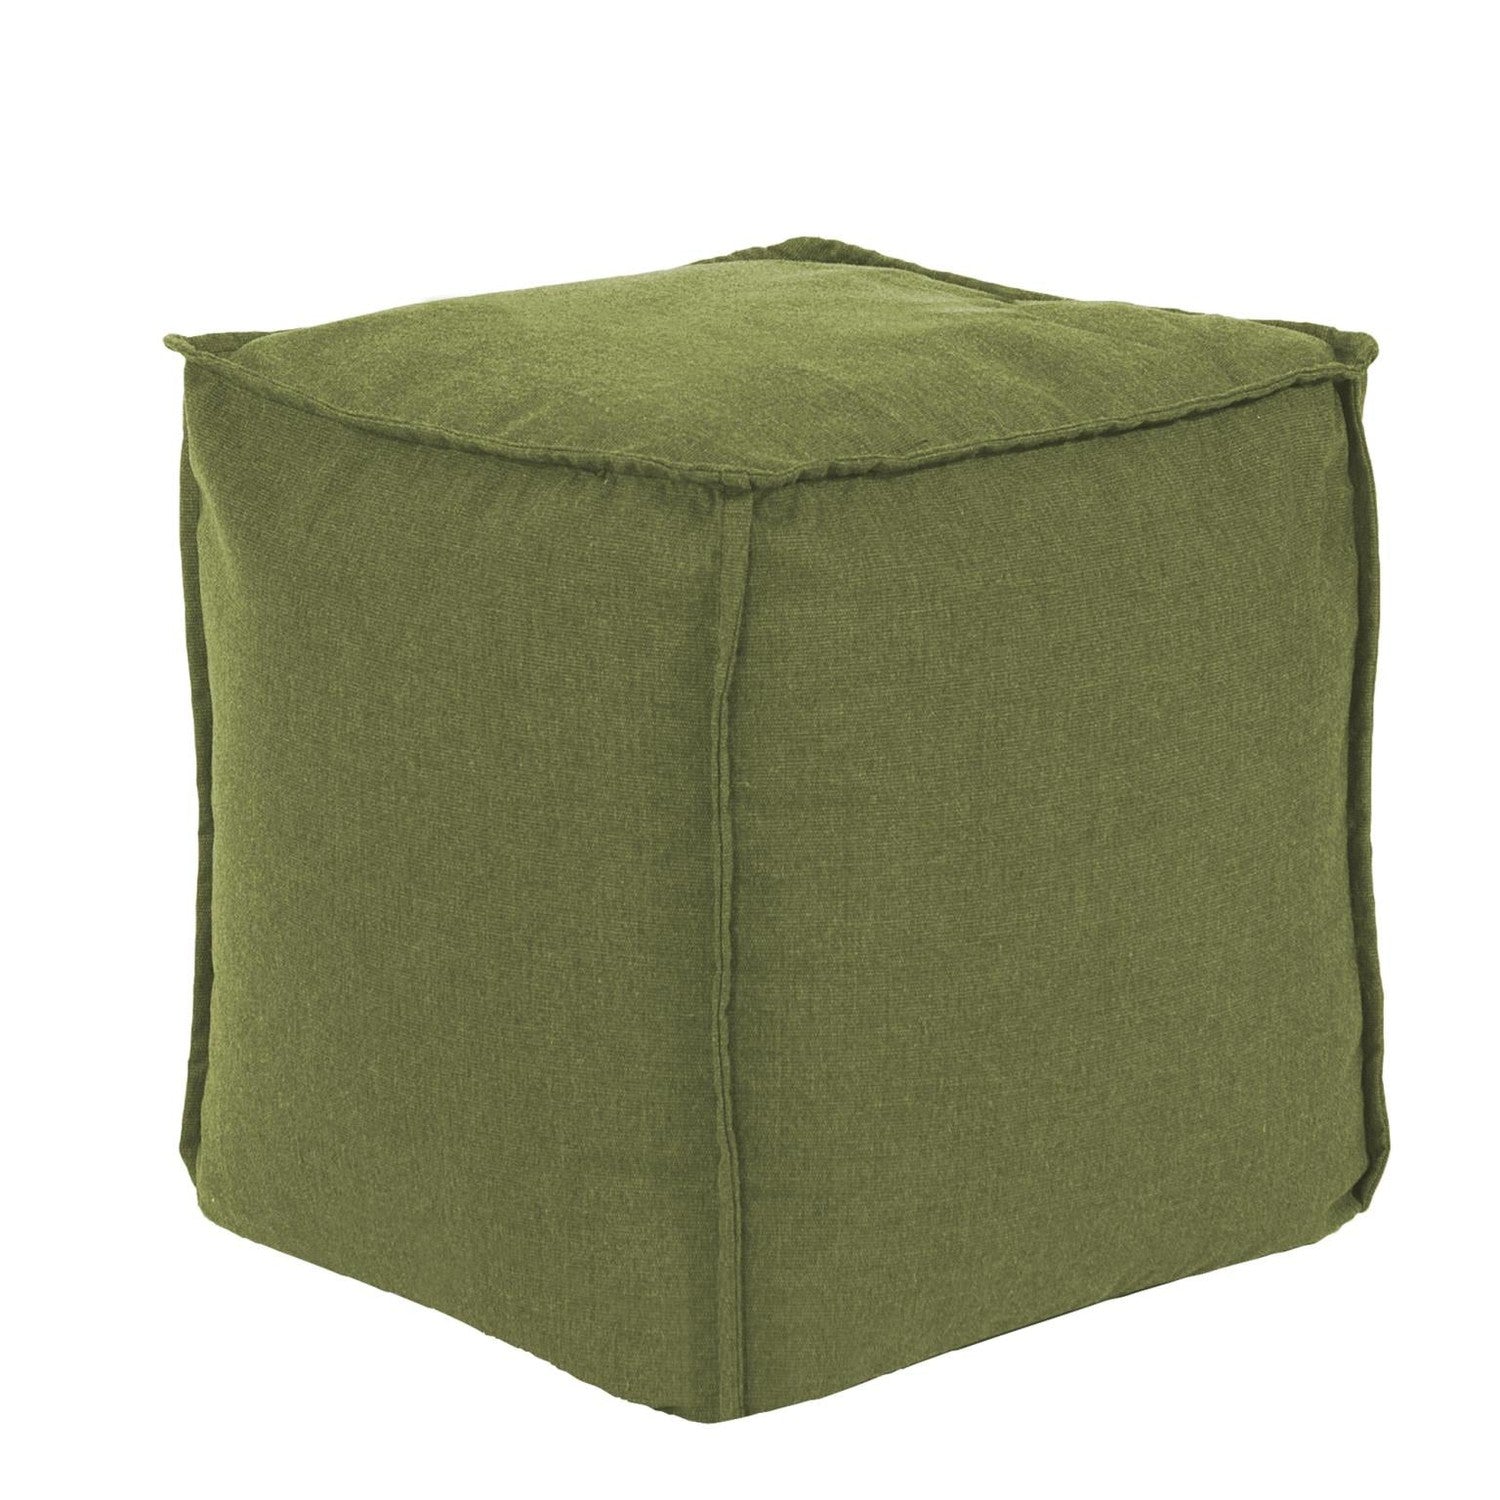 Outdoor Square Pouf-The Howard Elliott Collection-HOWARD-Q873-299-Stools & OttomansMoss-Cube Pouf-20-France and Son